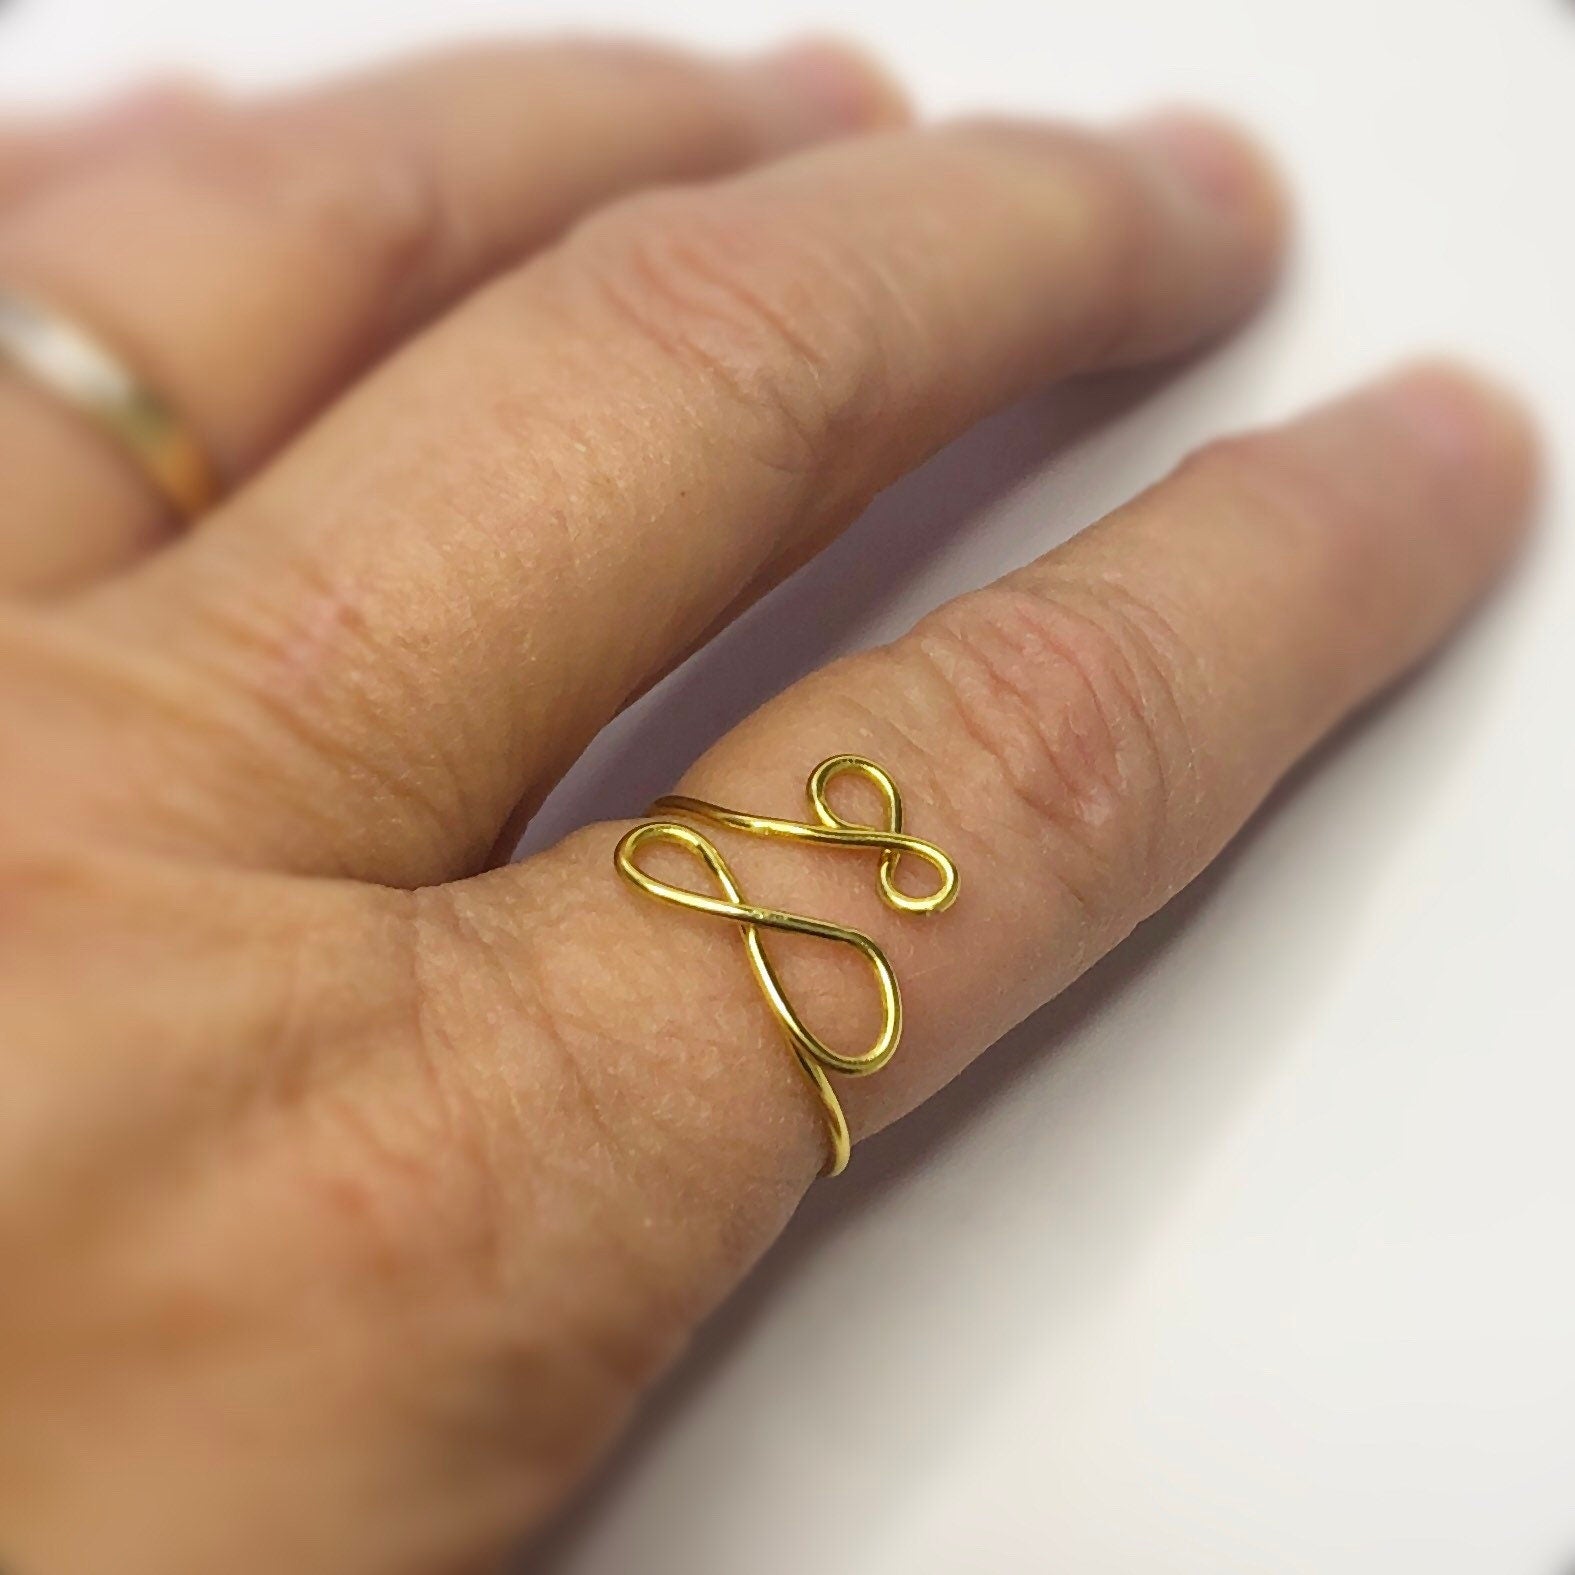 Buy Infinity Ring Gold 14K Gold Infinity Ring Women Infinity Band, Ring for  Her Dainty Infinity Symbol Ring Gold Ring, Gift for Her Love Ring Online in  India - Etsy